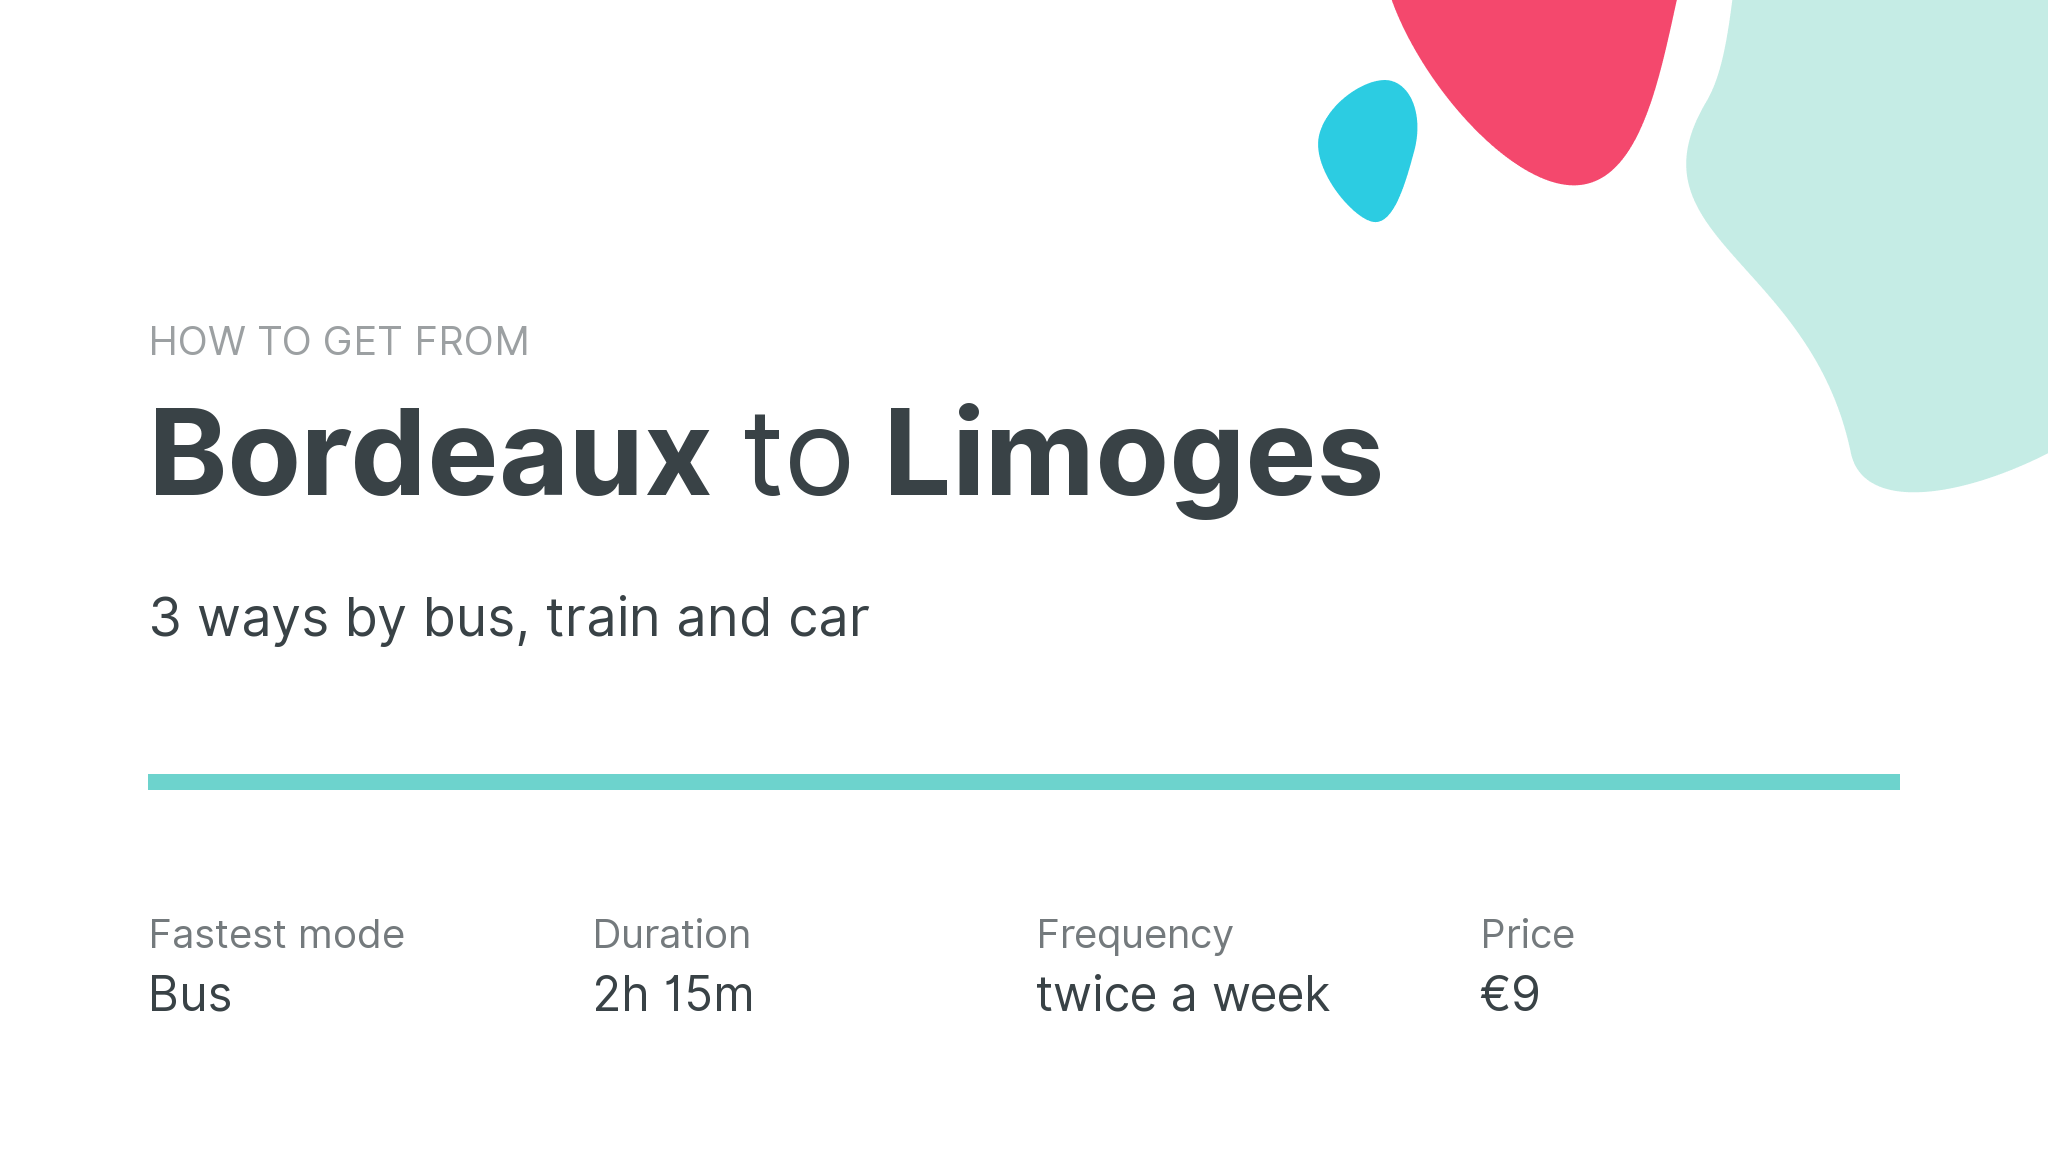 How do I get from Bordeaux to Limoges